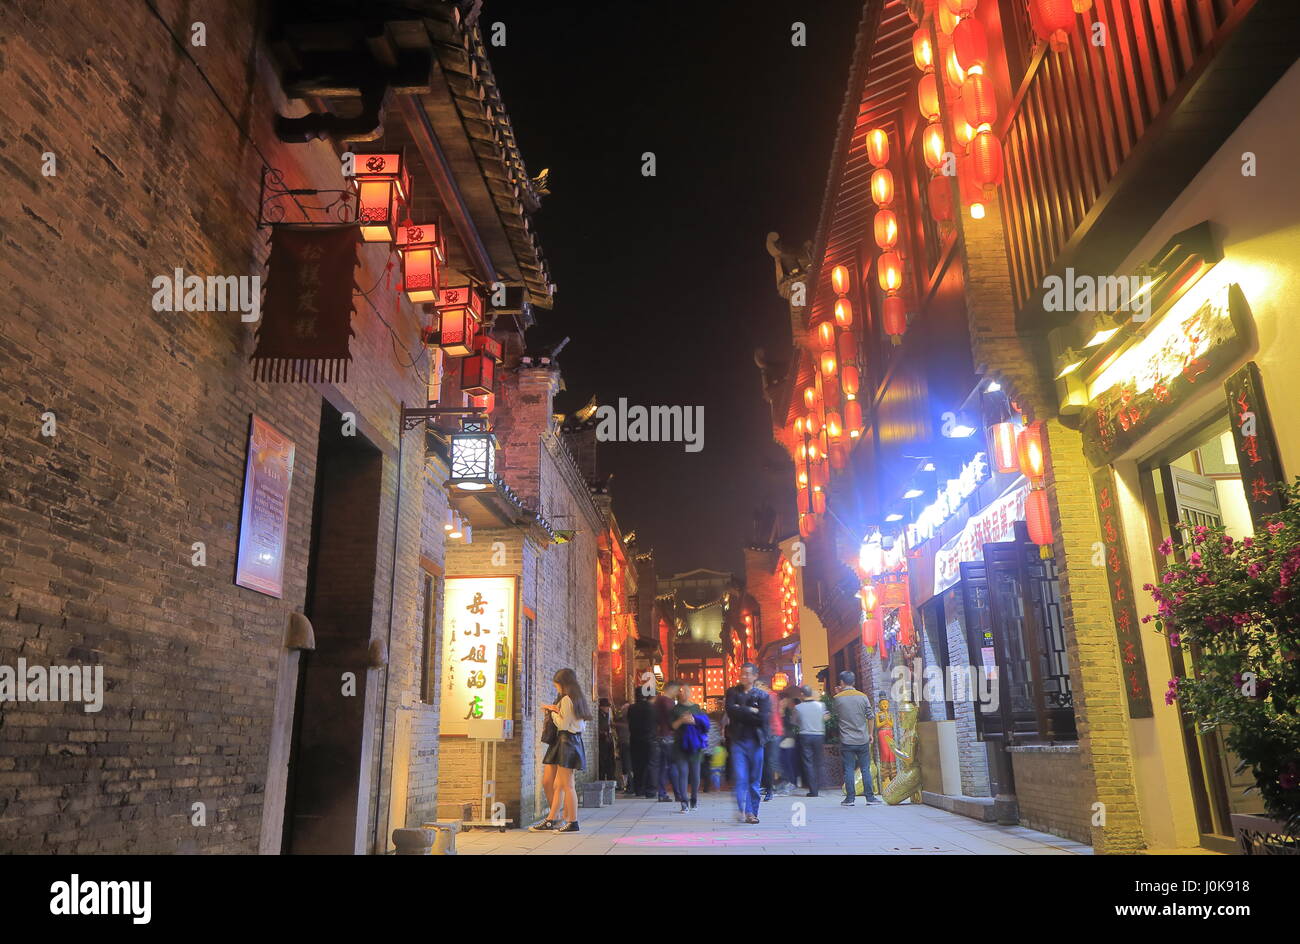 People visit East West street in Guilin China. East West street features boutiques, galleries, traditional teahouses, bars and cafes in folk styles. Stock Photo